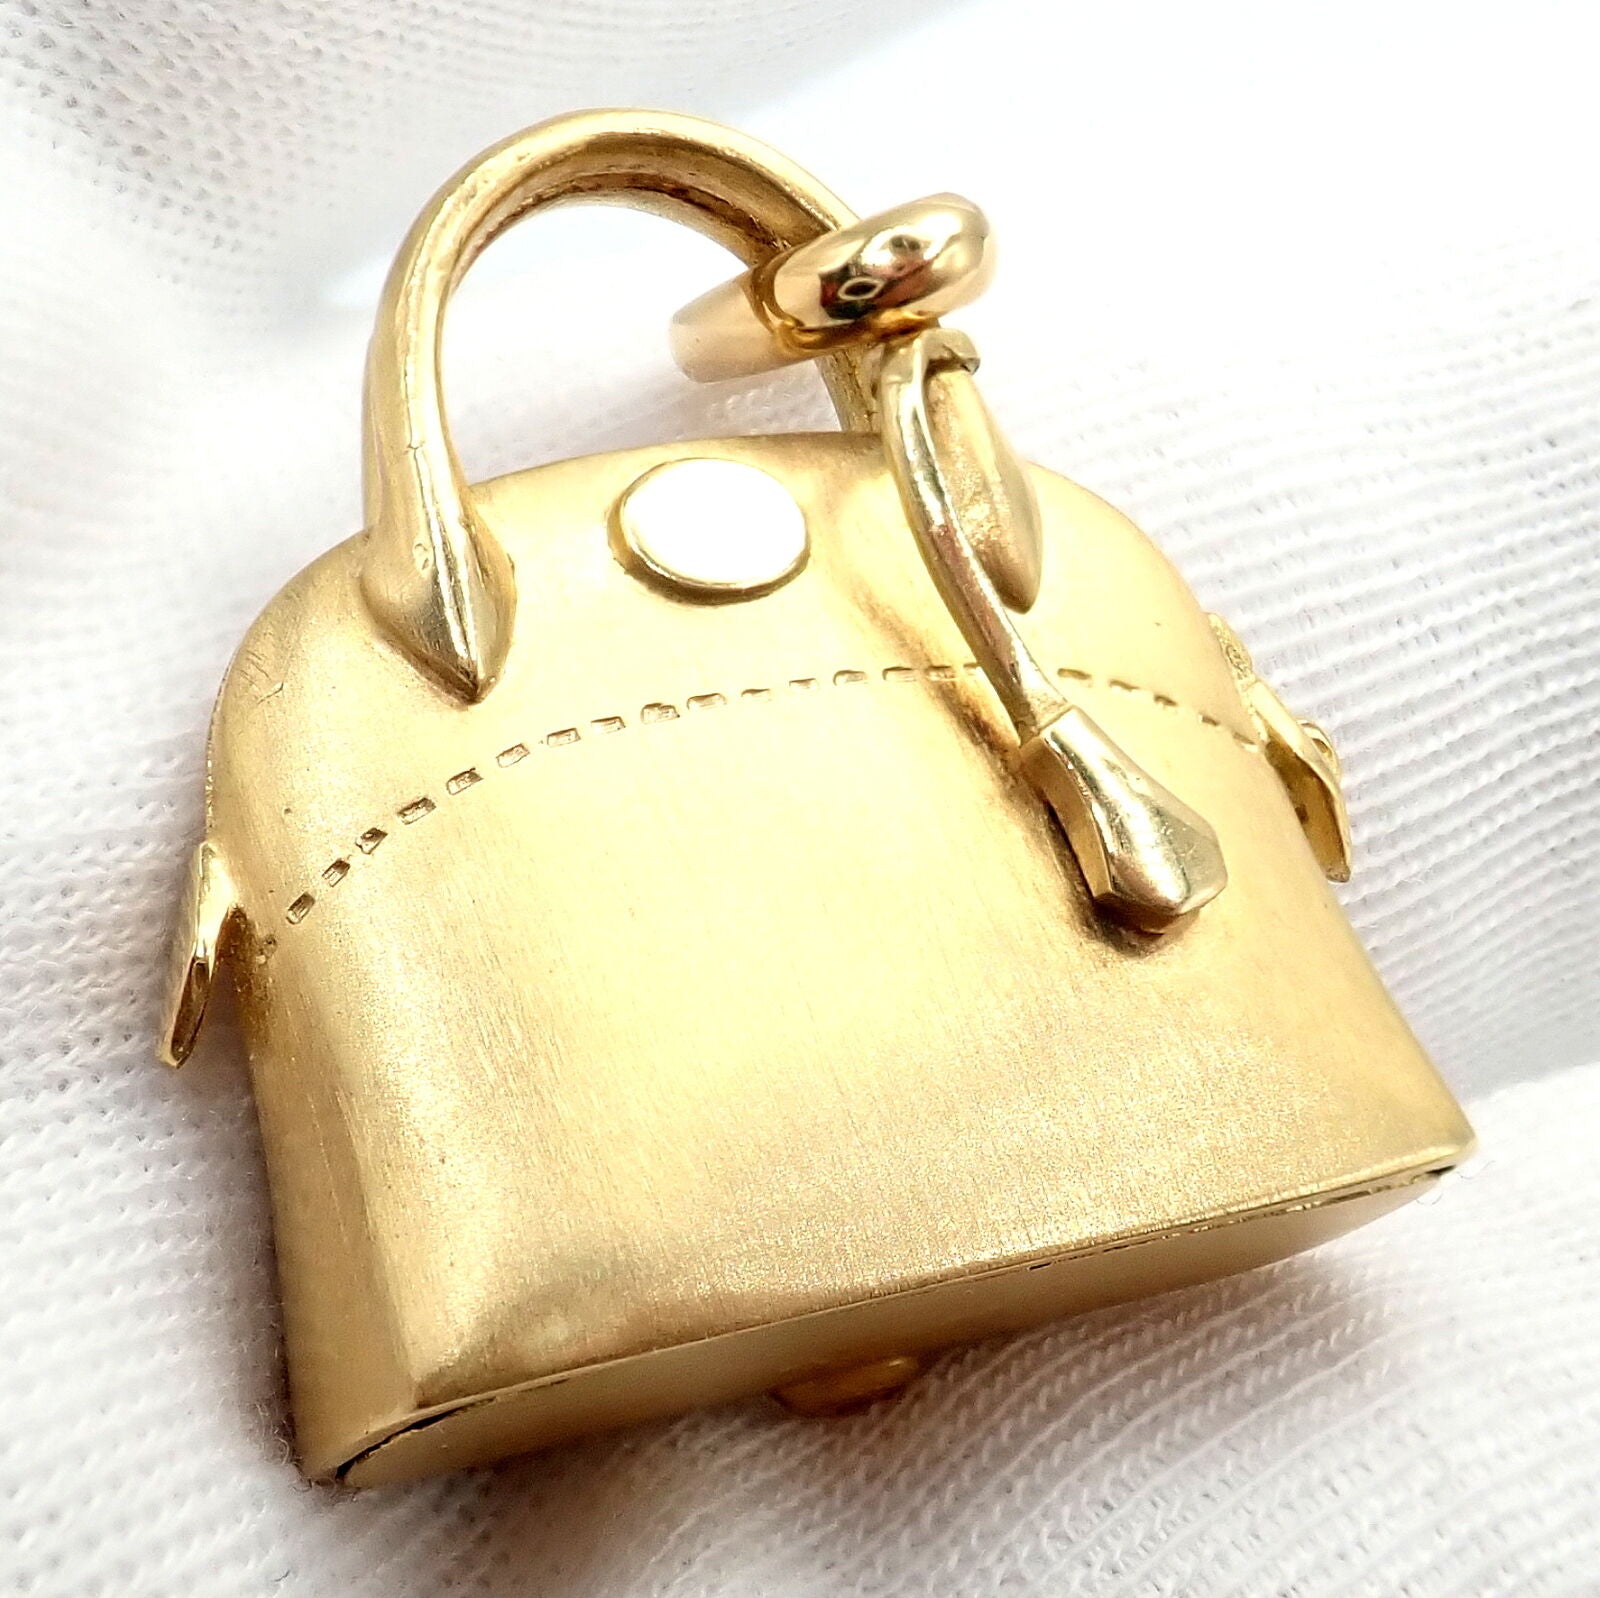 Rare! Authentic Hermes Bolide 18K Yellow Gold Bag Purse Large Charm Pendant